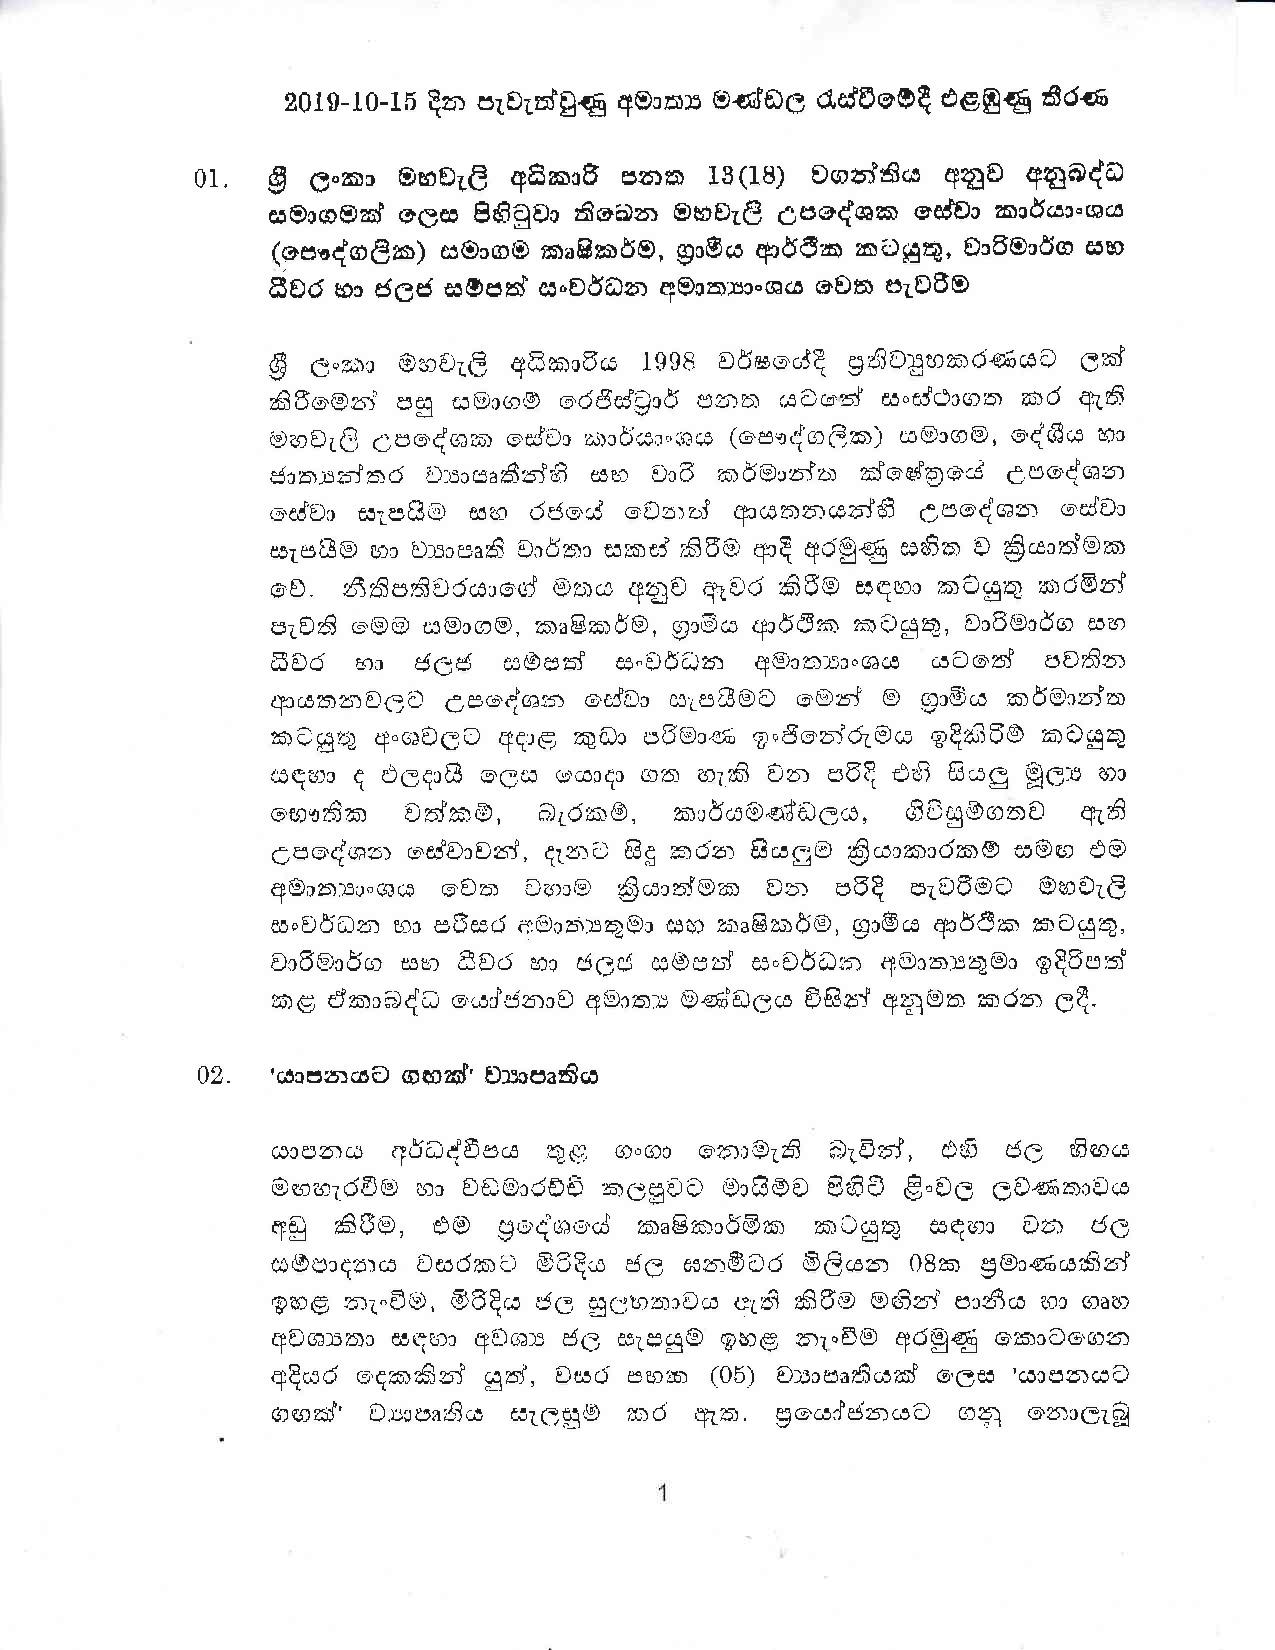 Cabinet Decision on 15.10.2019 page 001